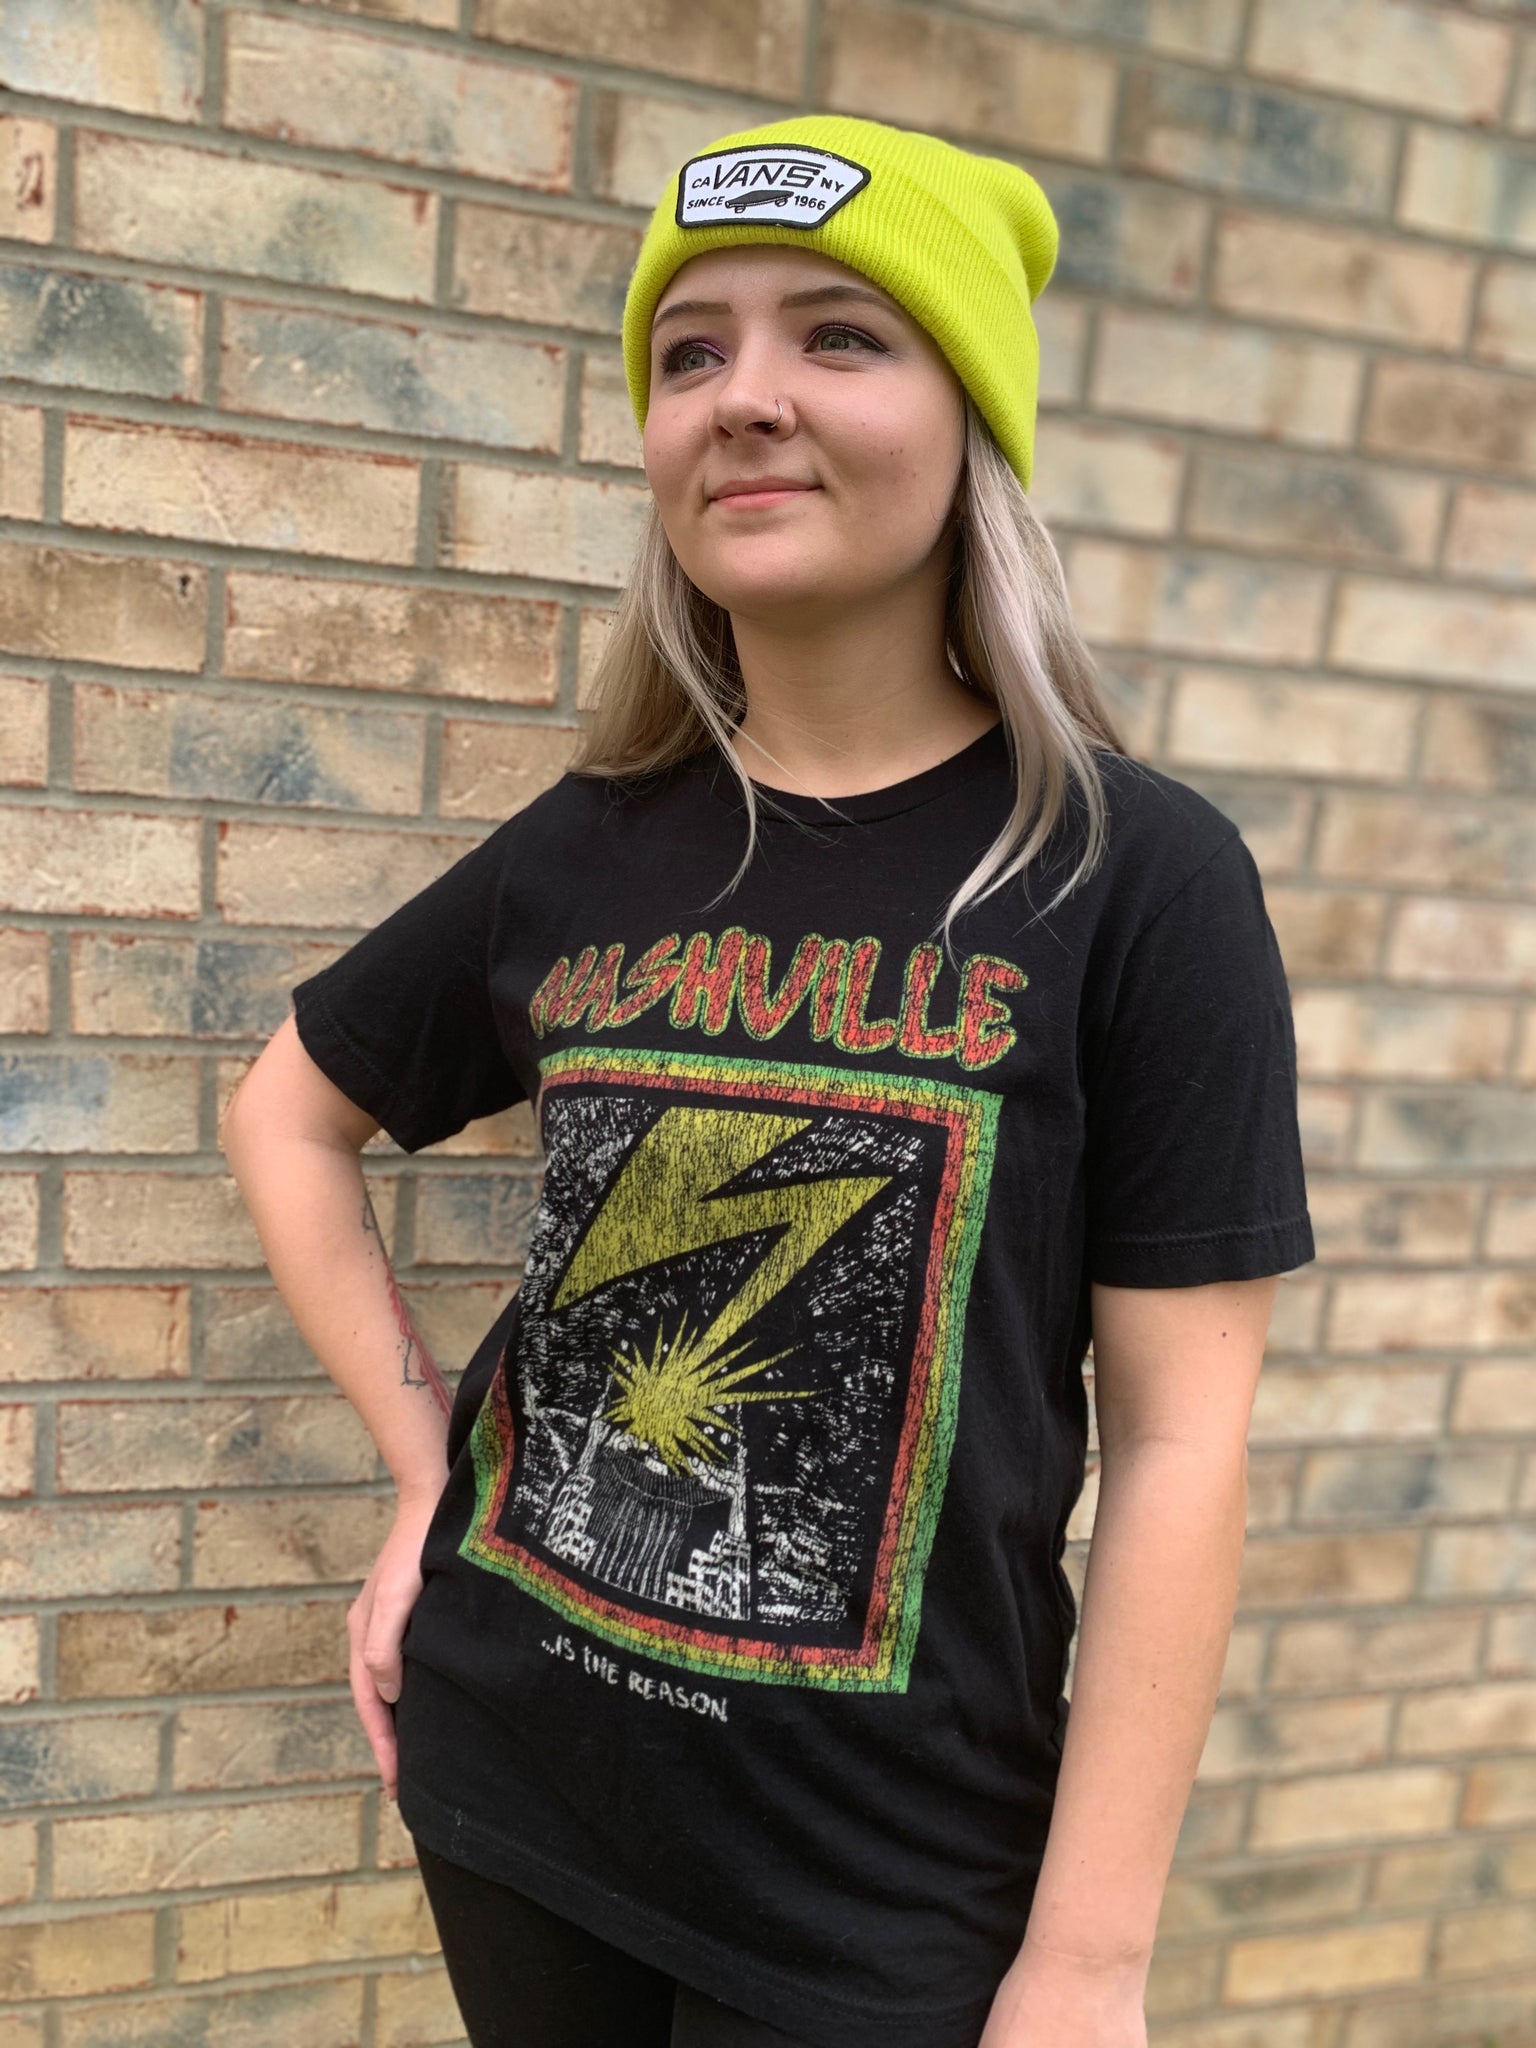 Bad Brains' Womens Fitted T-Shirt